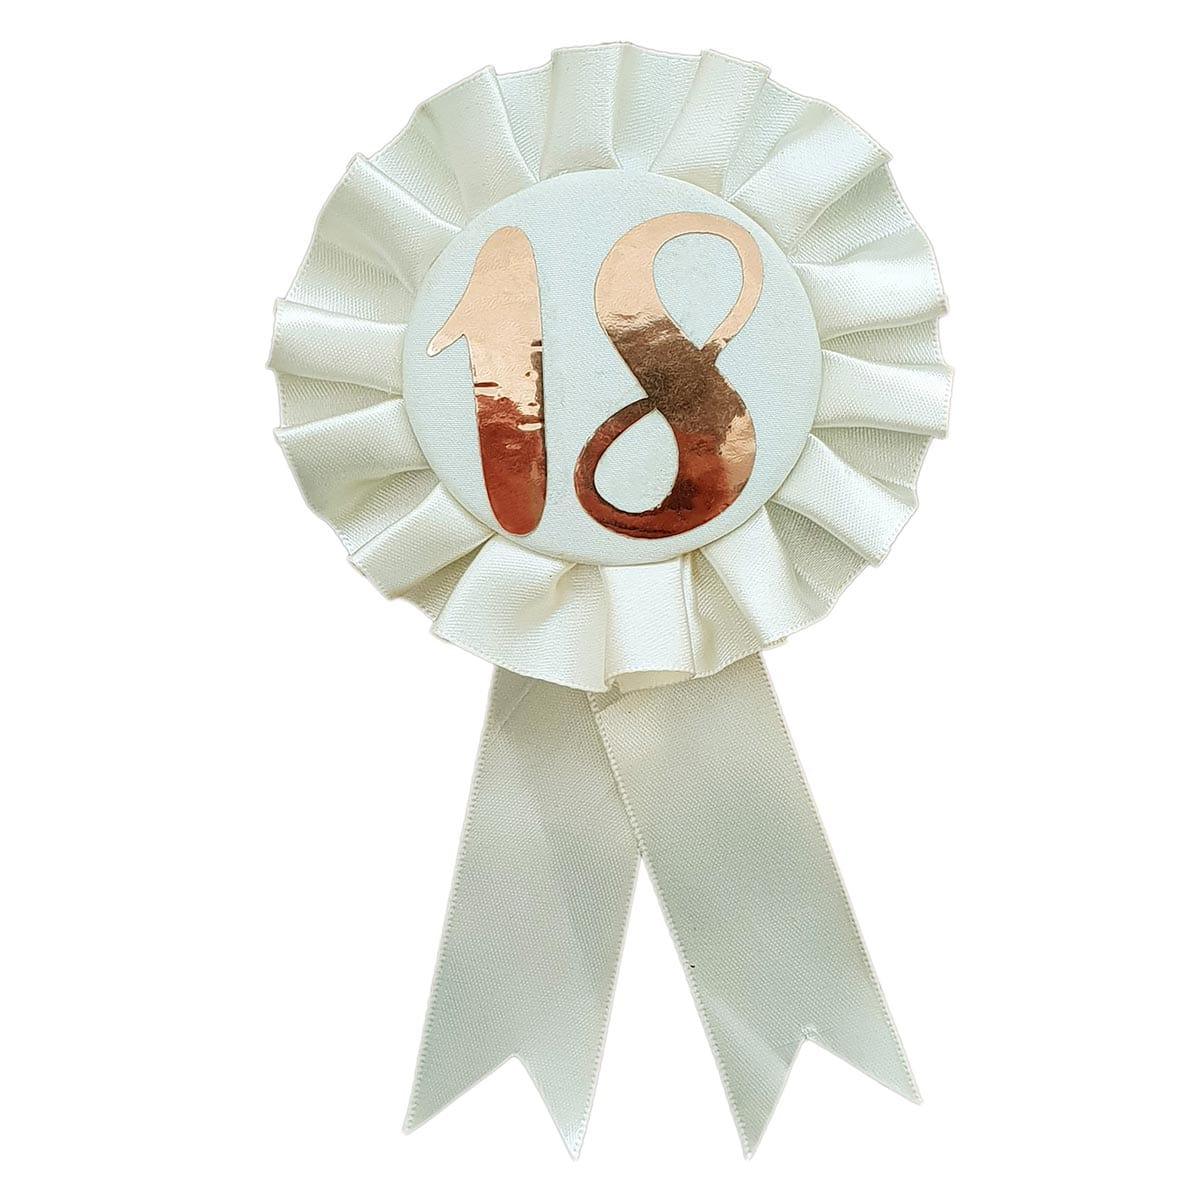 Buy Age Specific Birthday Rosette Badge Rose Gold - 18th sold at Party Expert